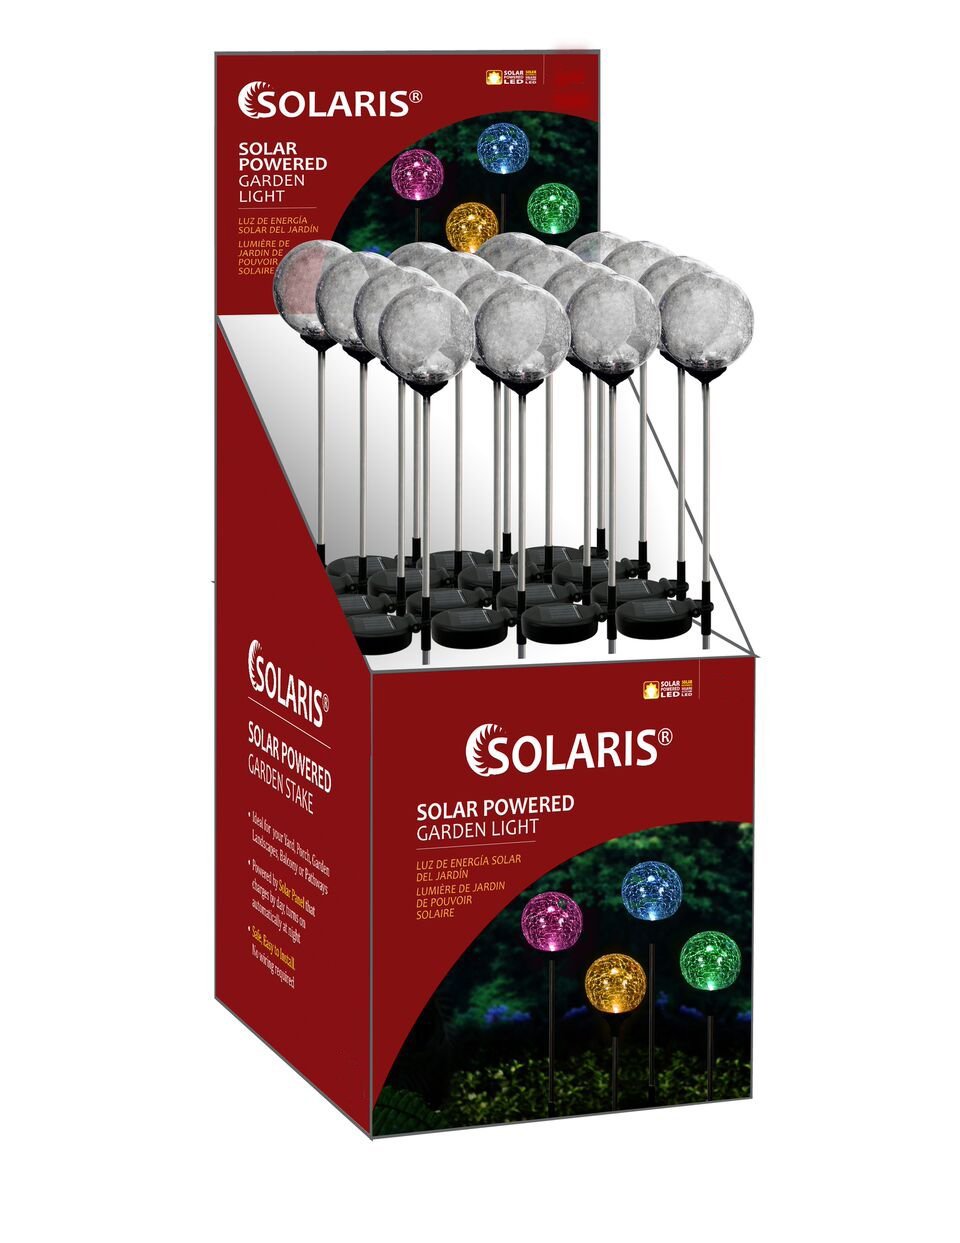 Solar Crackle Ball With Color Changing LED Stake - Display Of 16